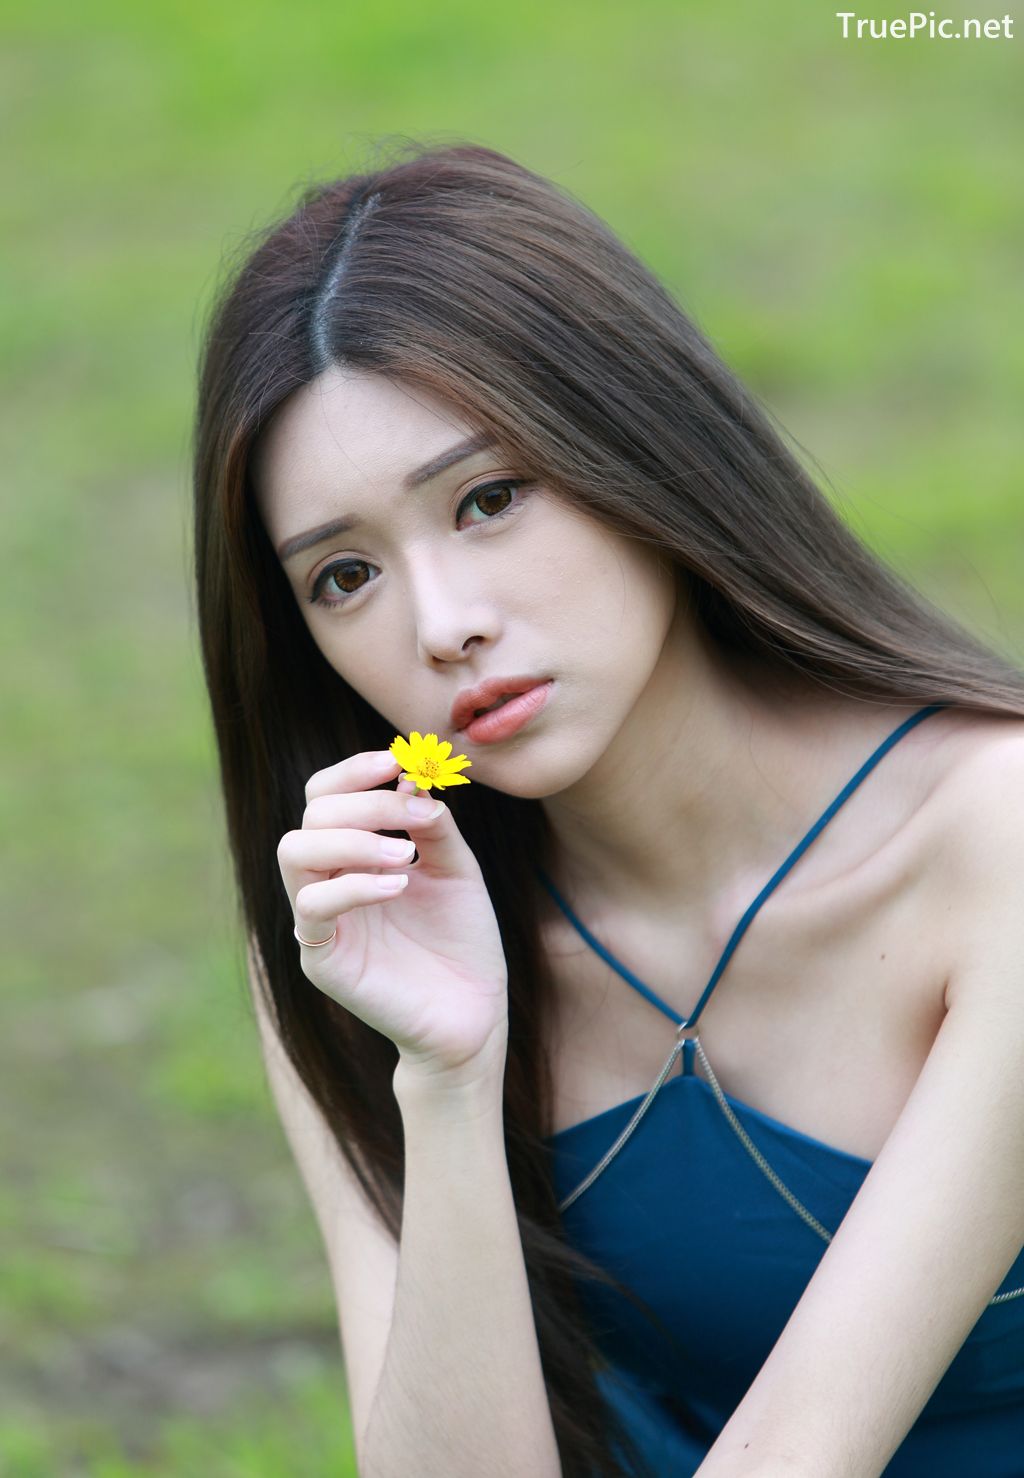 Image-Taiwanese-Pure-Girl-承容-Young-Beautiful-And-Lovely-TruePic.net- Picture-44